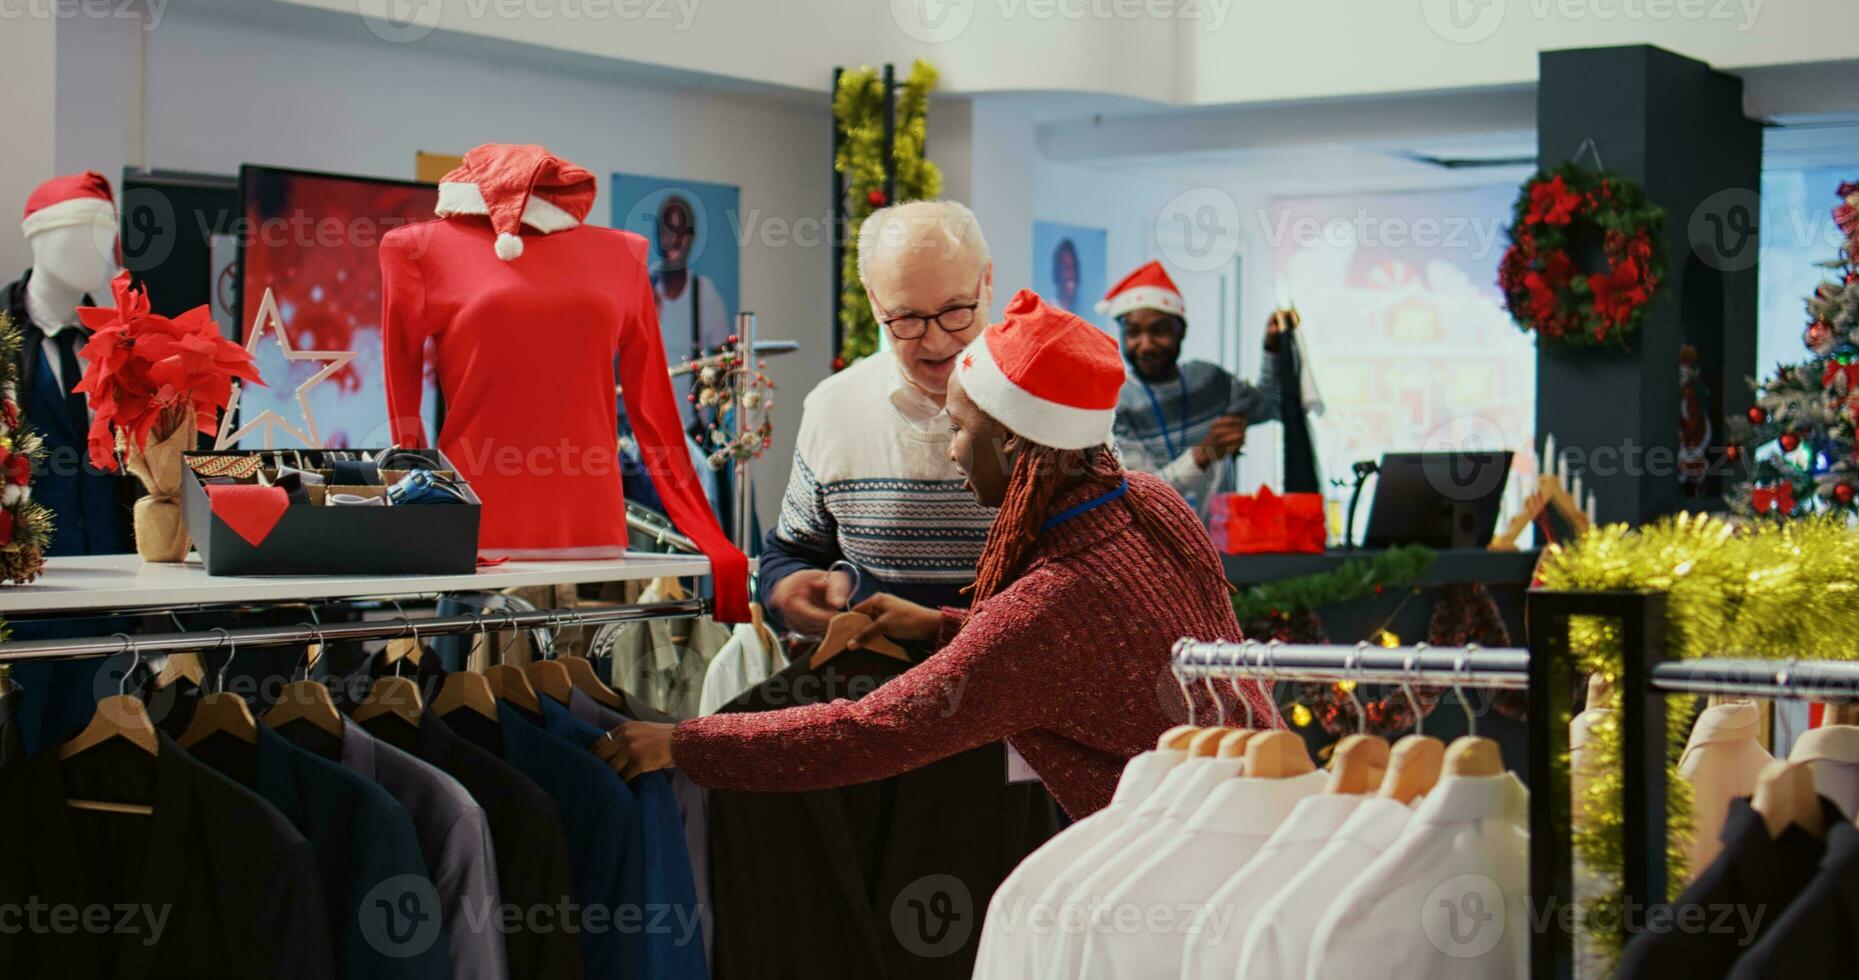 Elderly client being helped by retail assistant in festive decorated clothing store to determine if stylish blazer is the right fit. Employee assisting aged man in Christmas ornate fashion shop photo